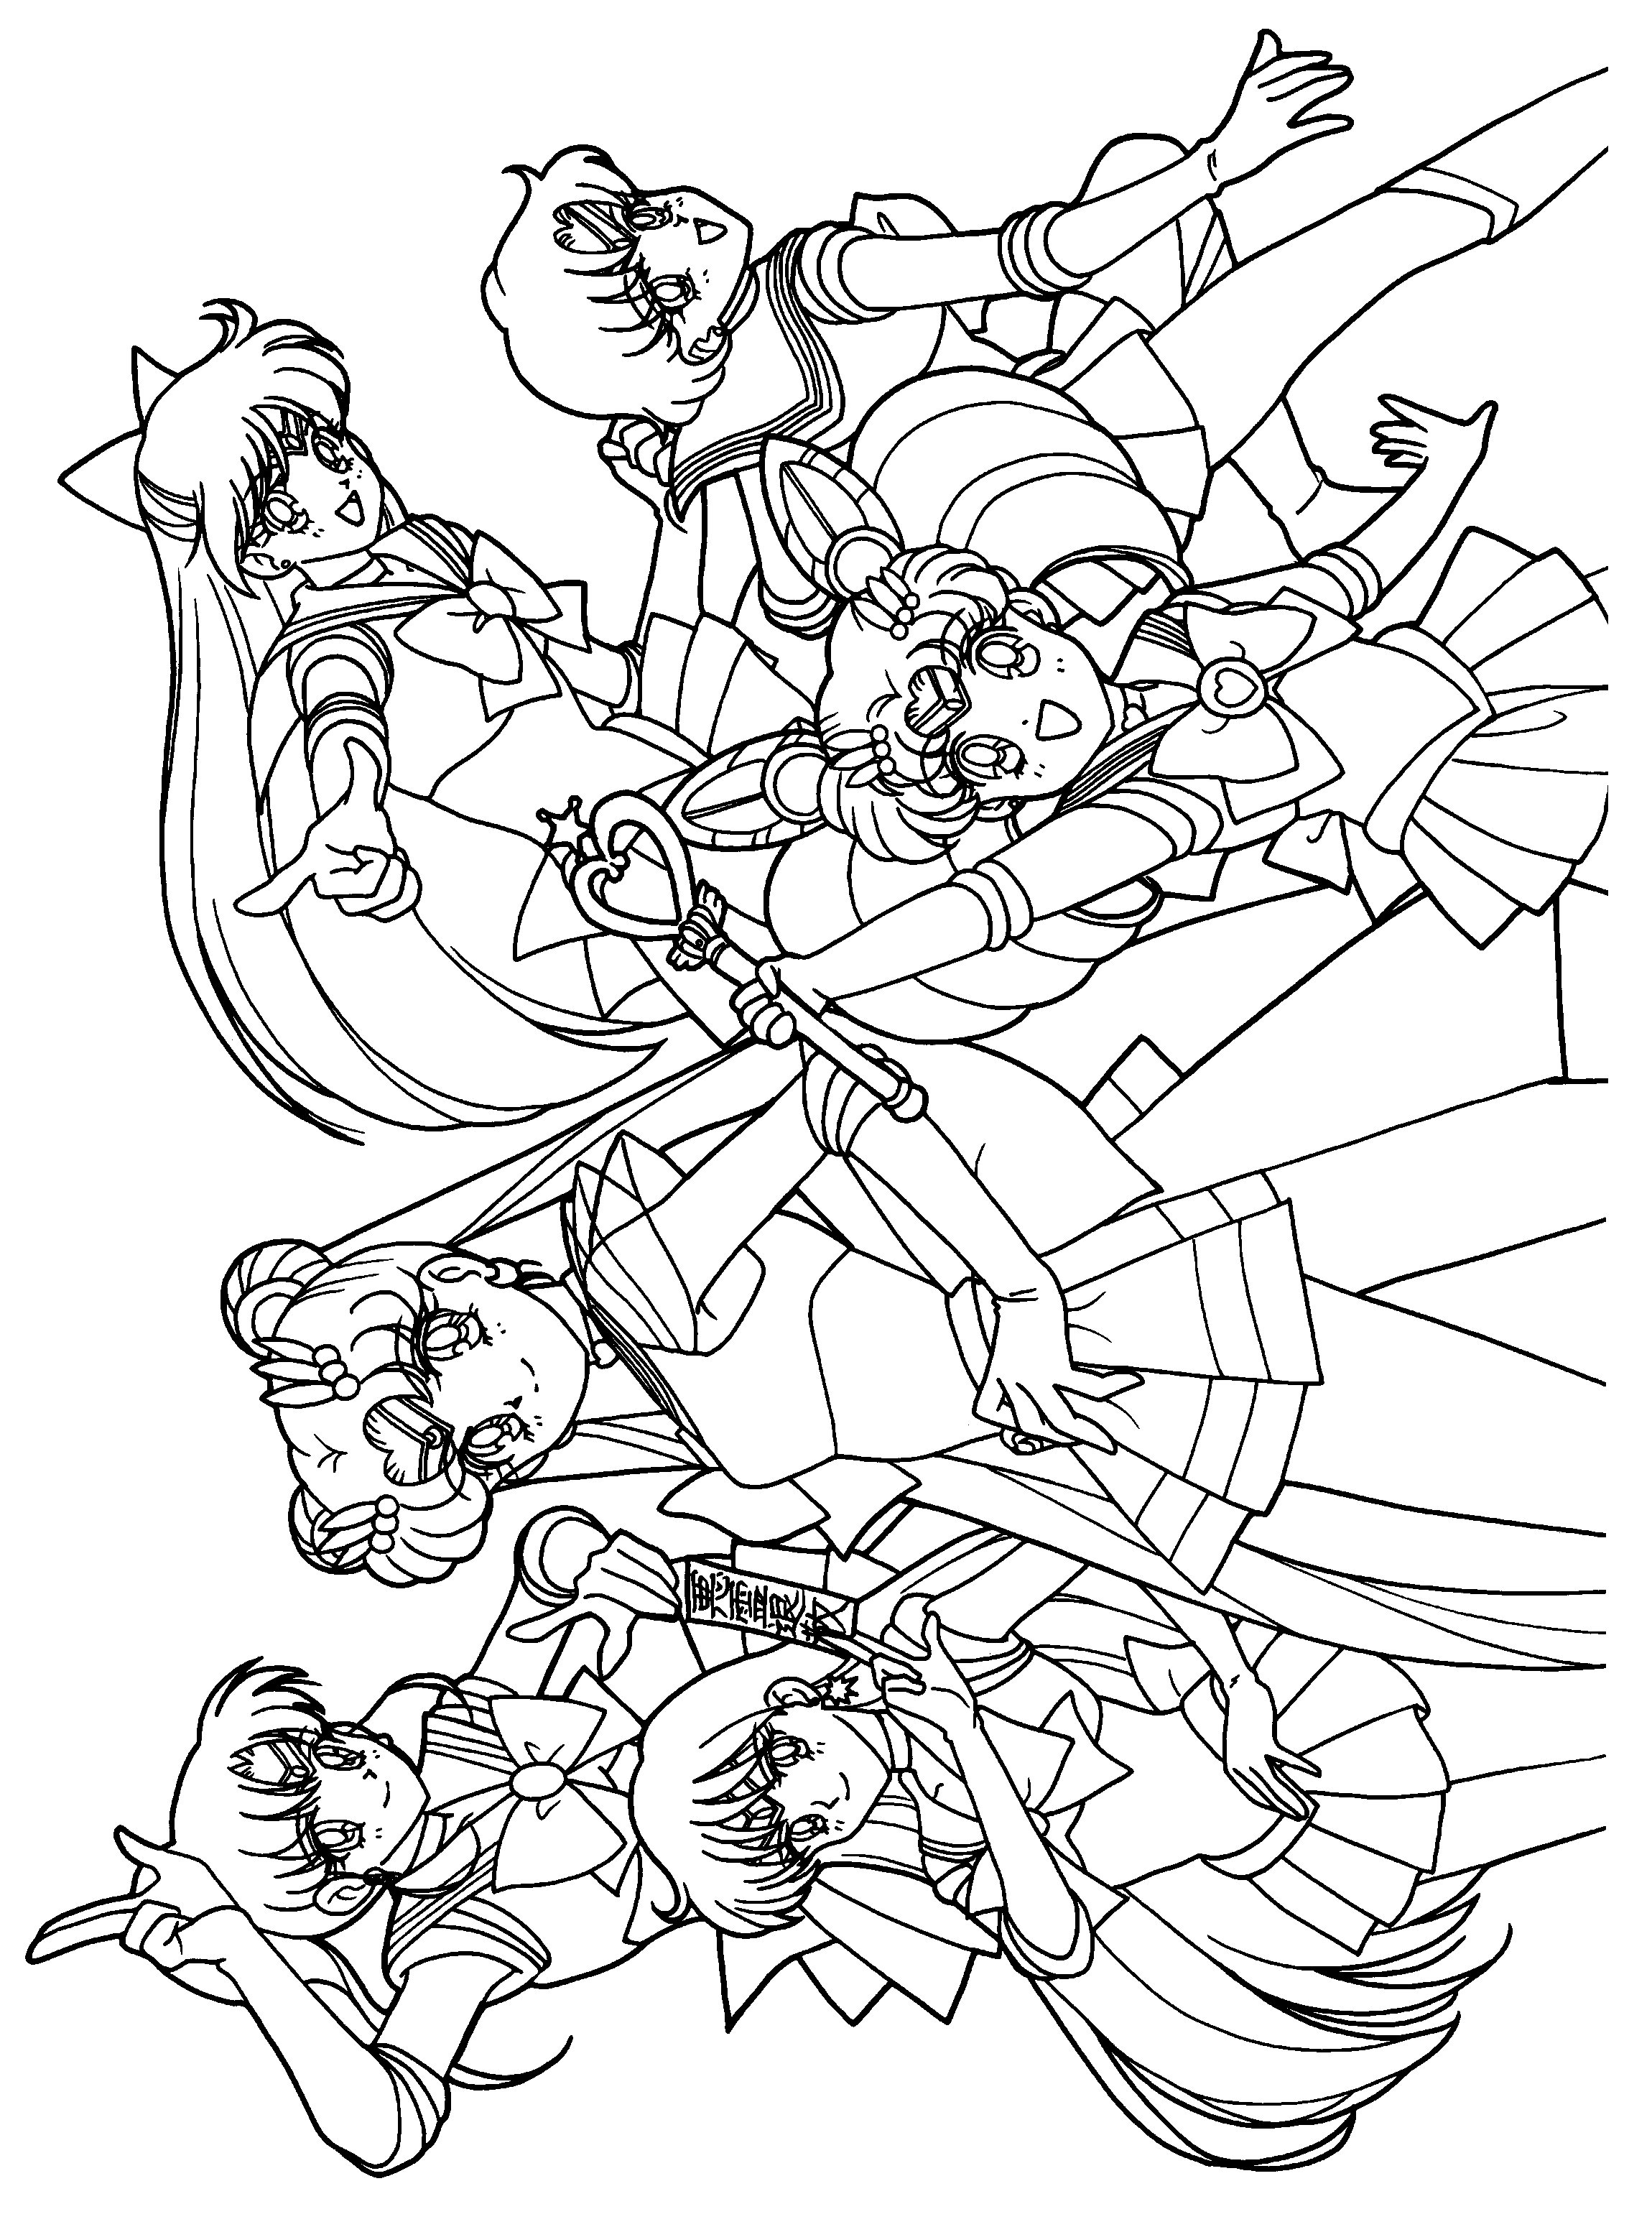 sailor moon all sailor scouts coloring pages - photo #11